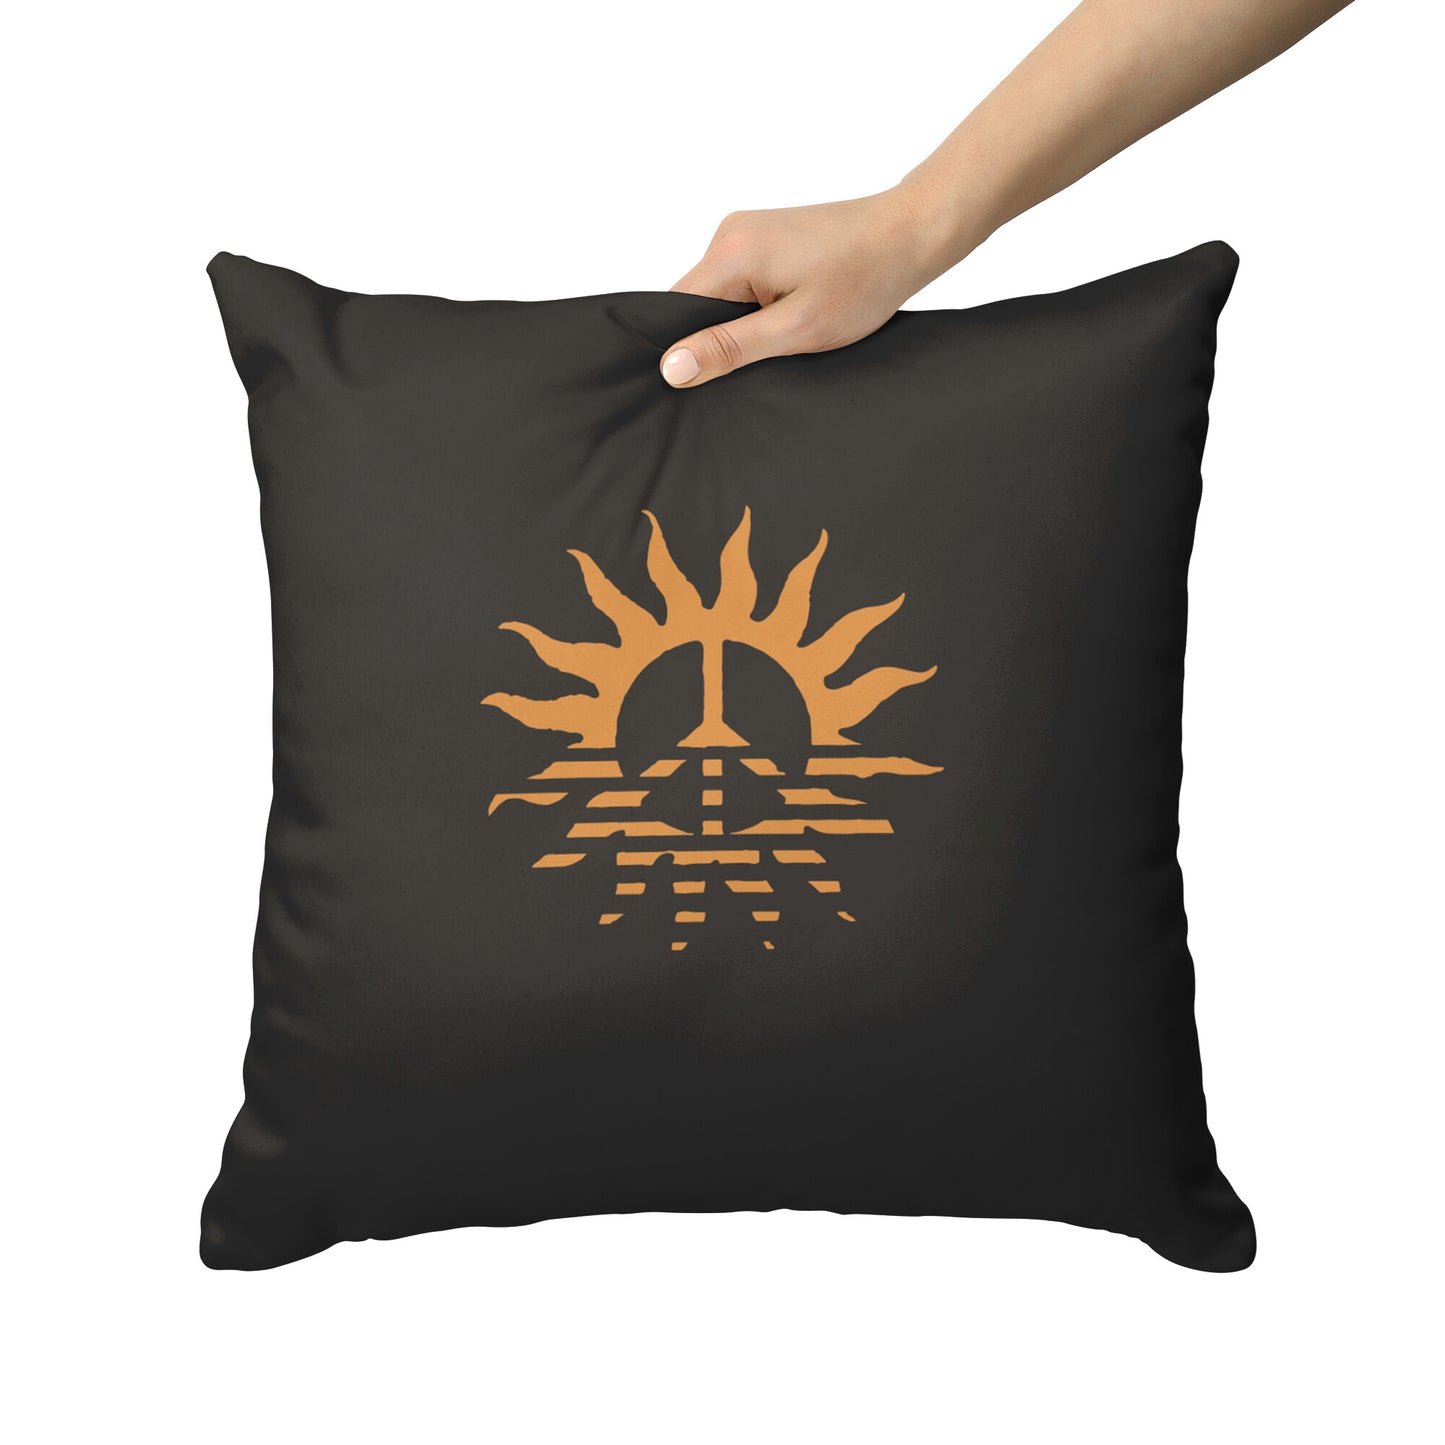 Vintage Peaceful Sunshine Pillows And Covers